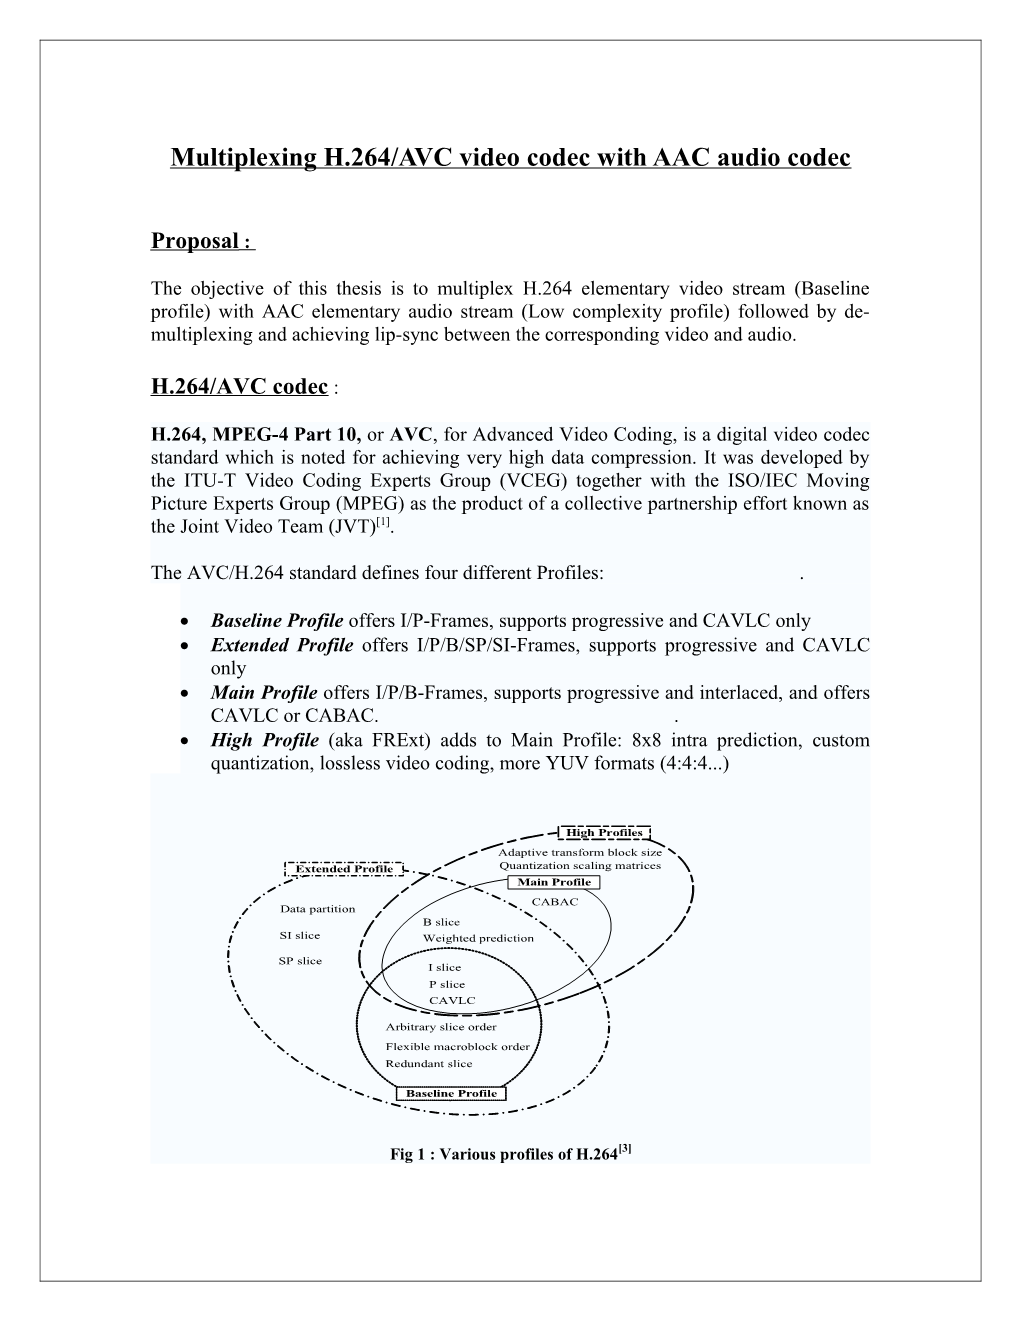 Multiplexing H.264/AVC Video Codec with AAC Audio Codec